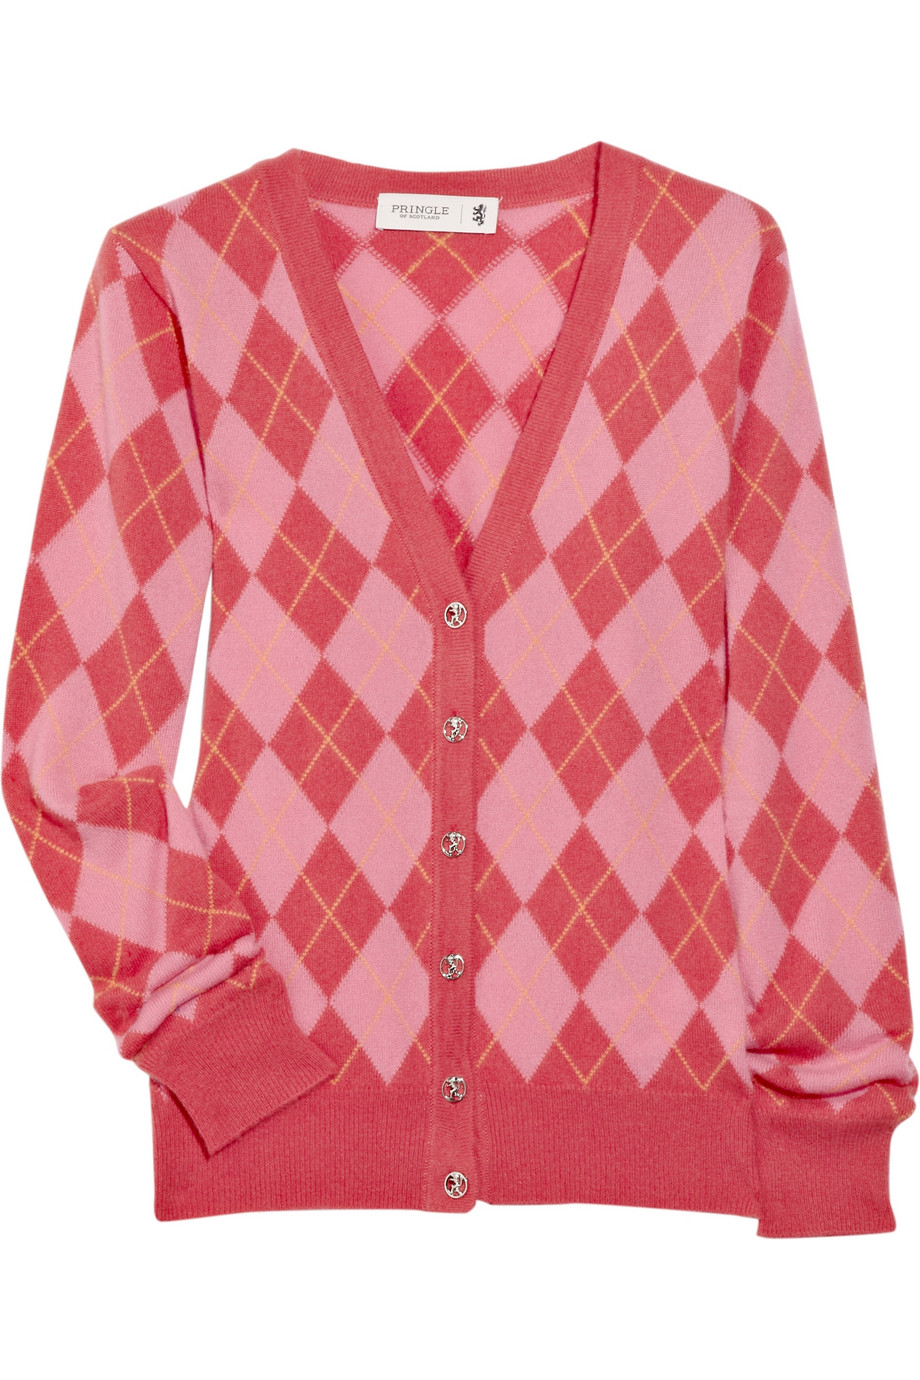 Pringle Of Scotland Cashmere Argyle Cardigan in Pink | Lyst